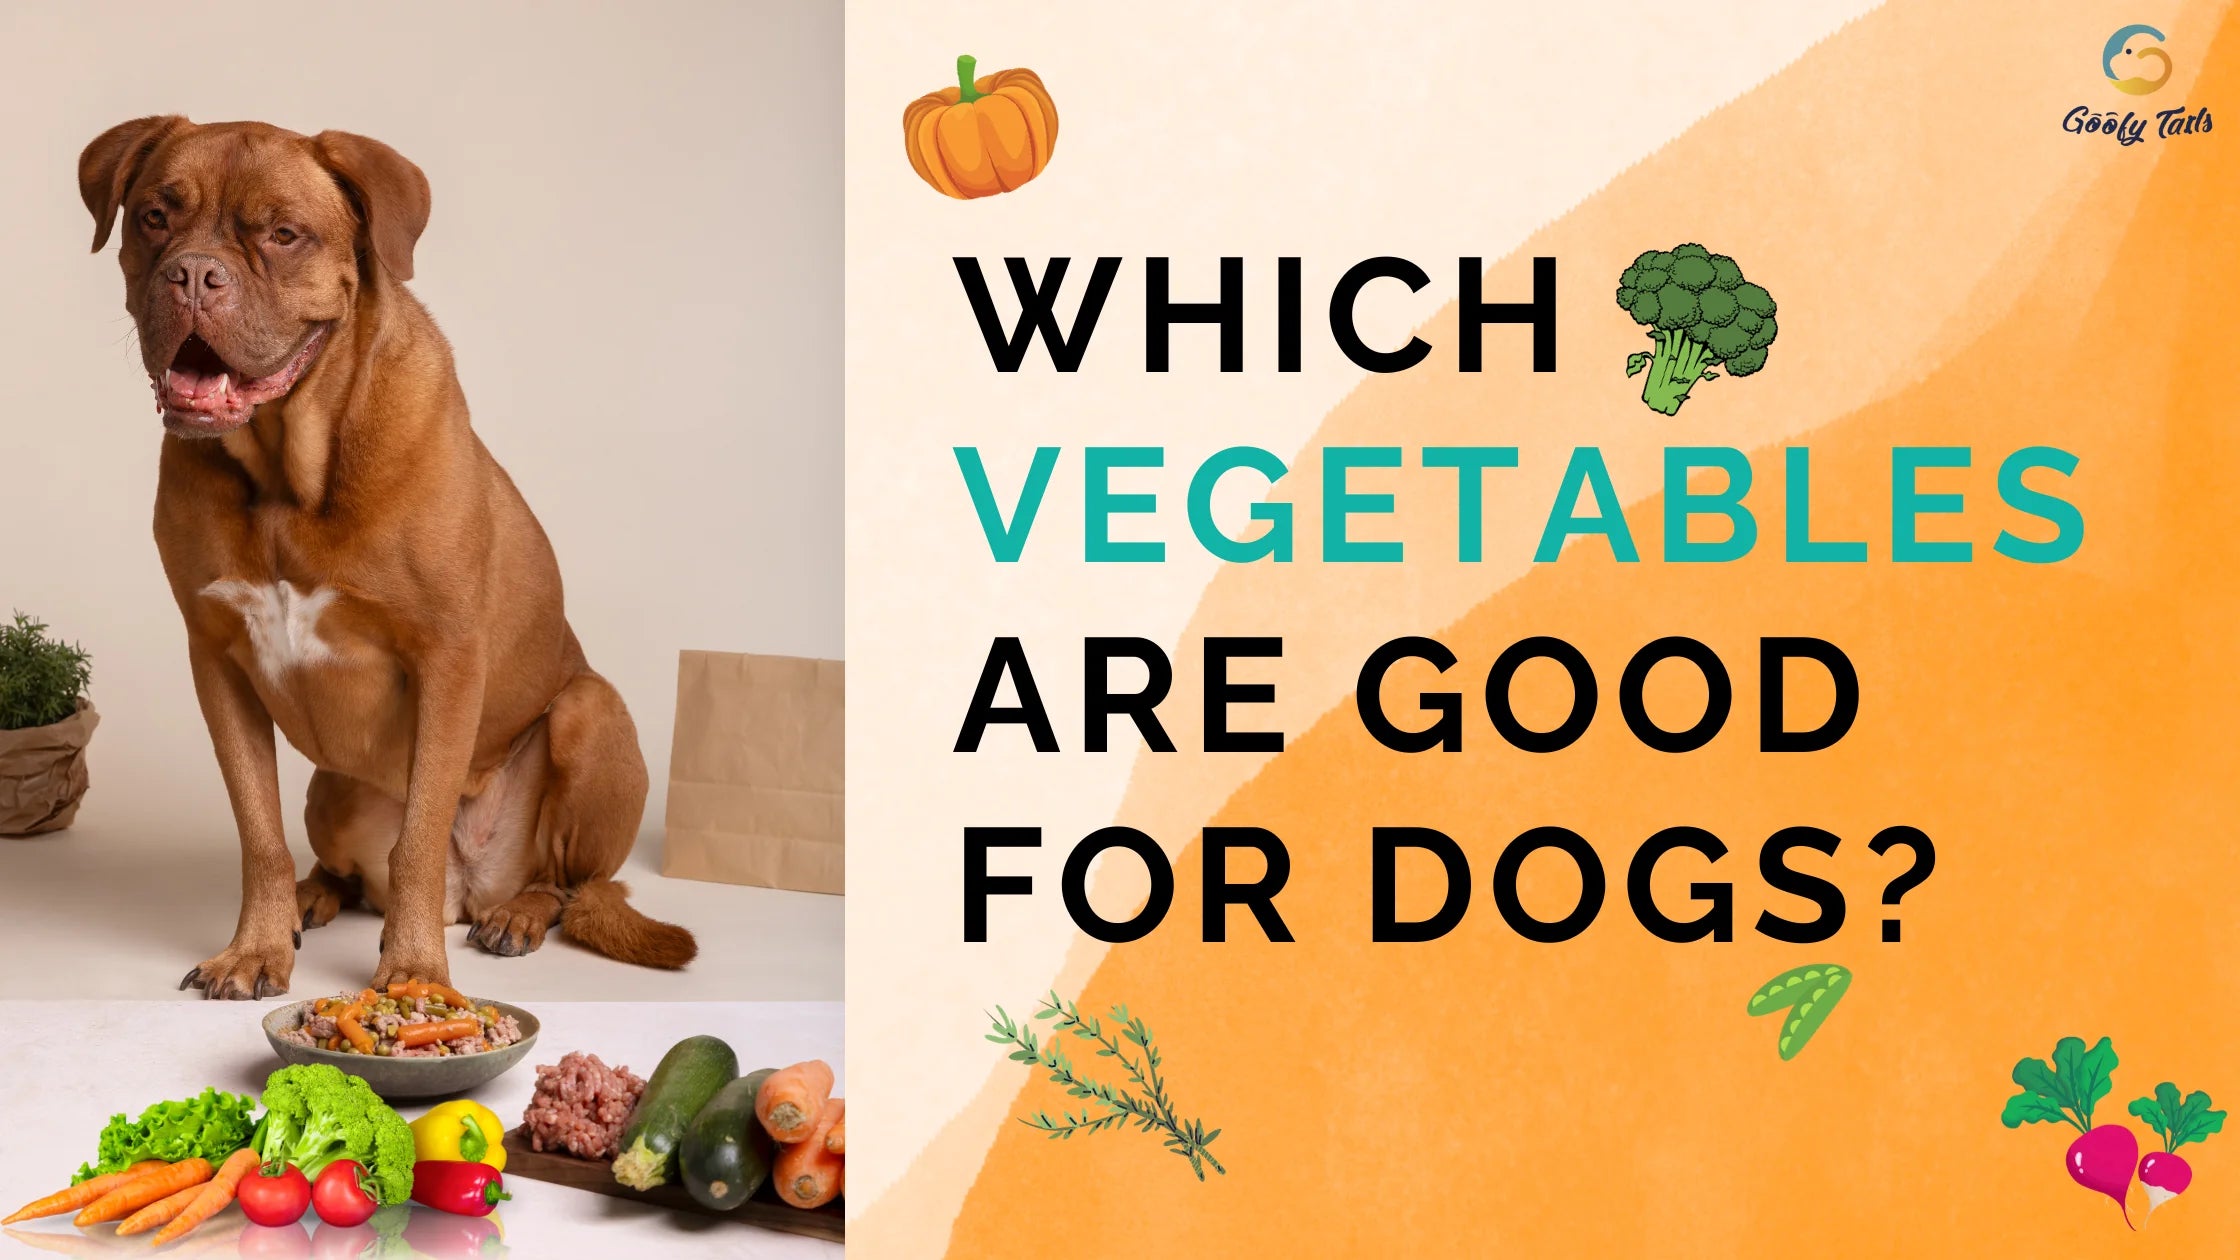 Which Vegetables are good for dogs?